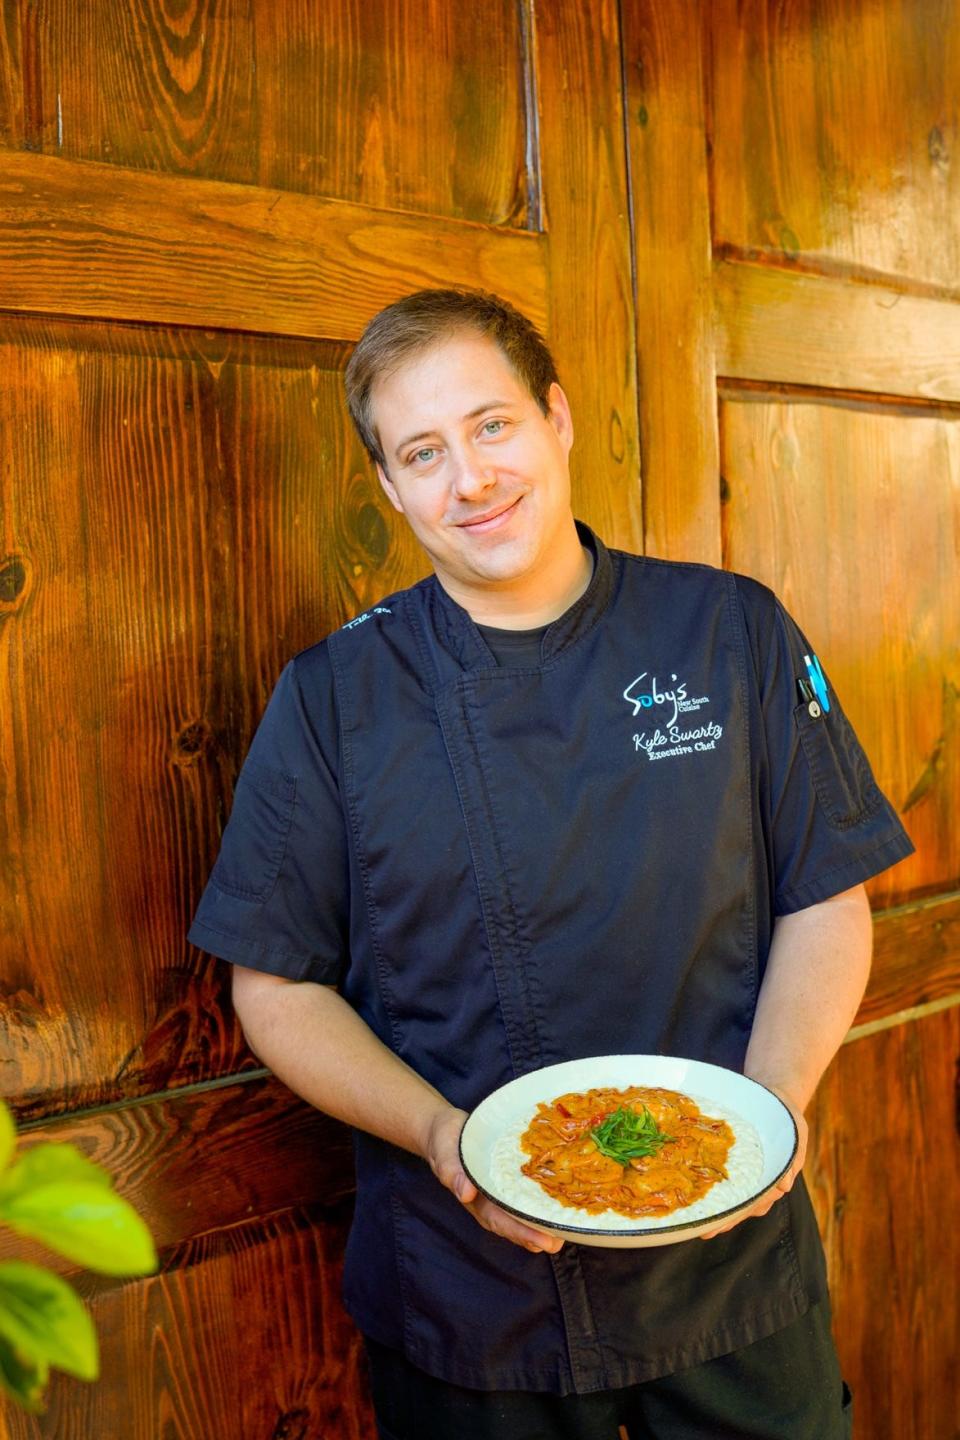 Chef Kyle of Table 301/Soby's showcasing their shrimp & grits dish which was voted best in Greenville in our March Madness foodie poll